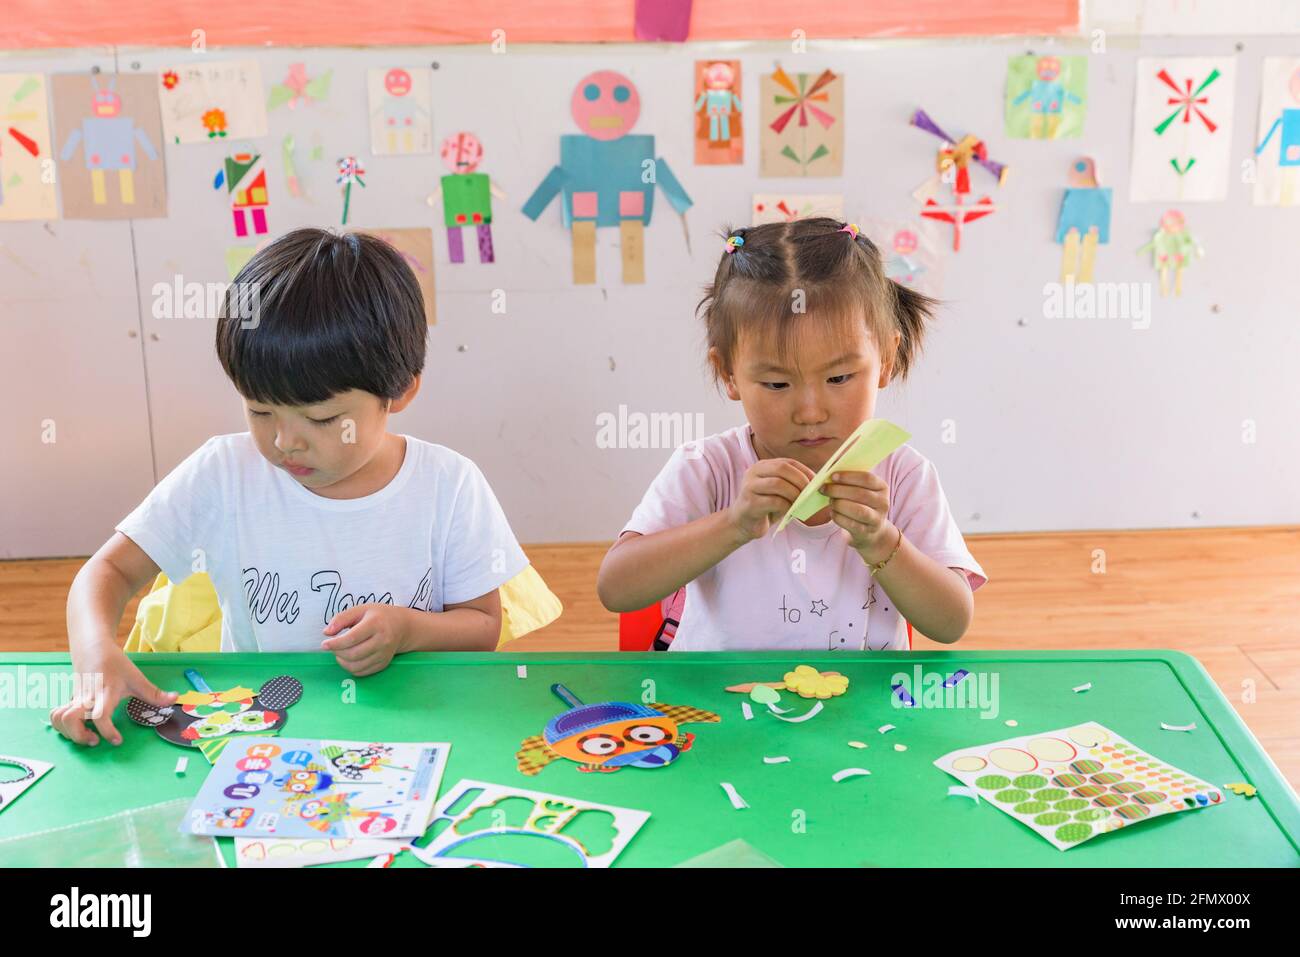 Students in a primary school in rural China working on an art and craft project. Stock Photo